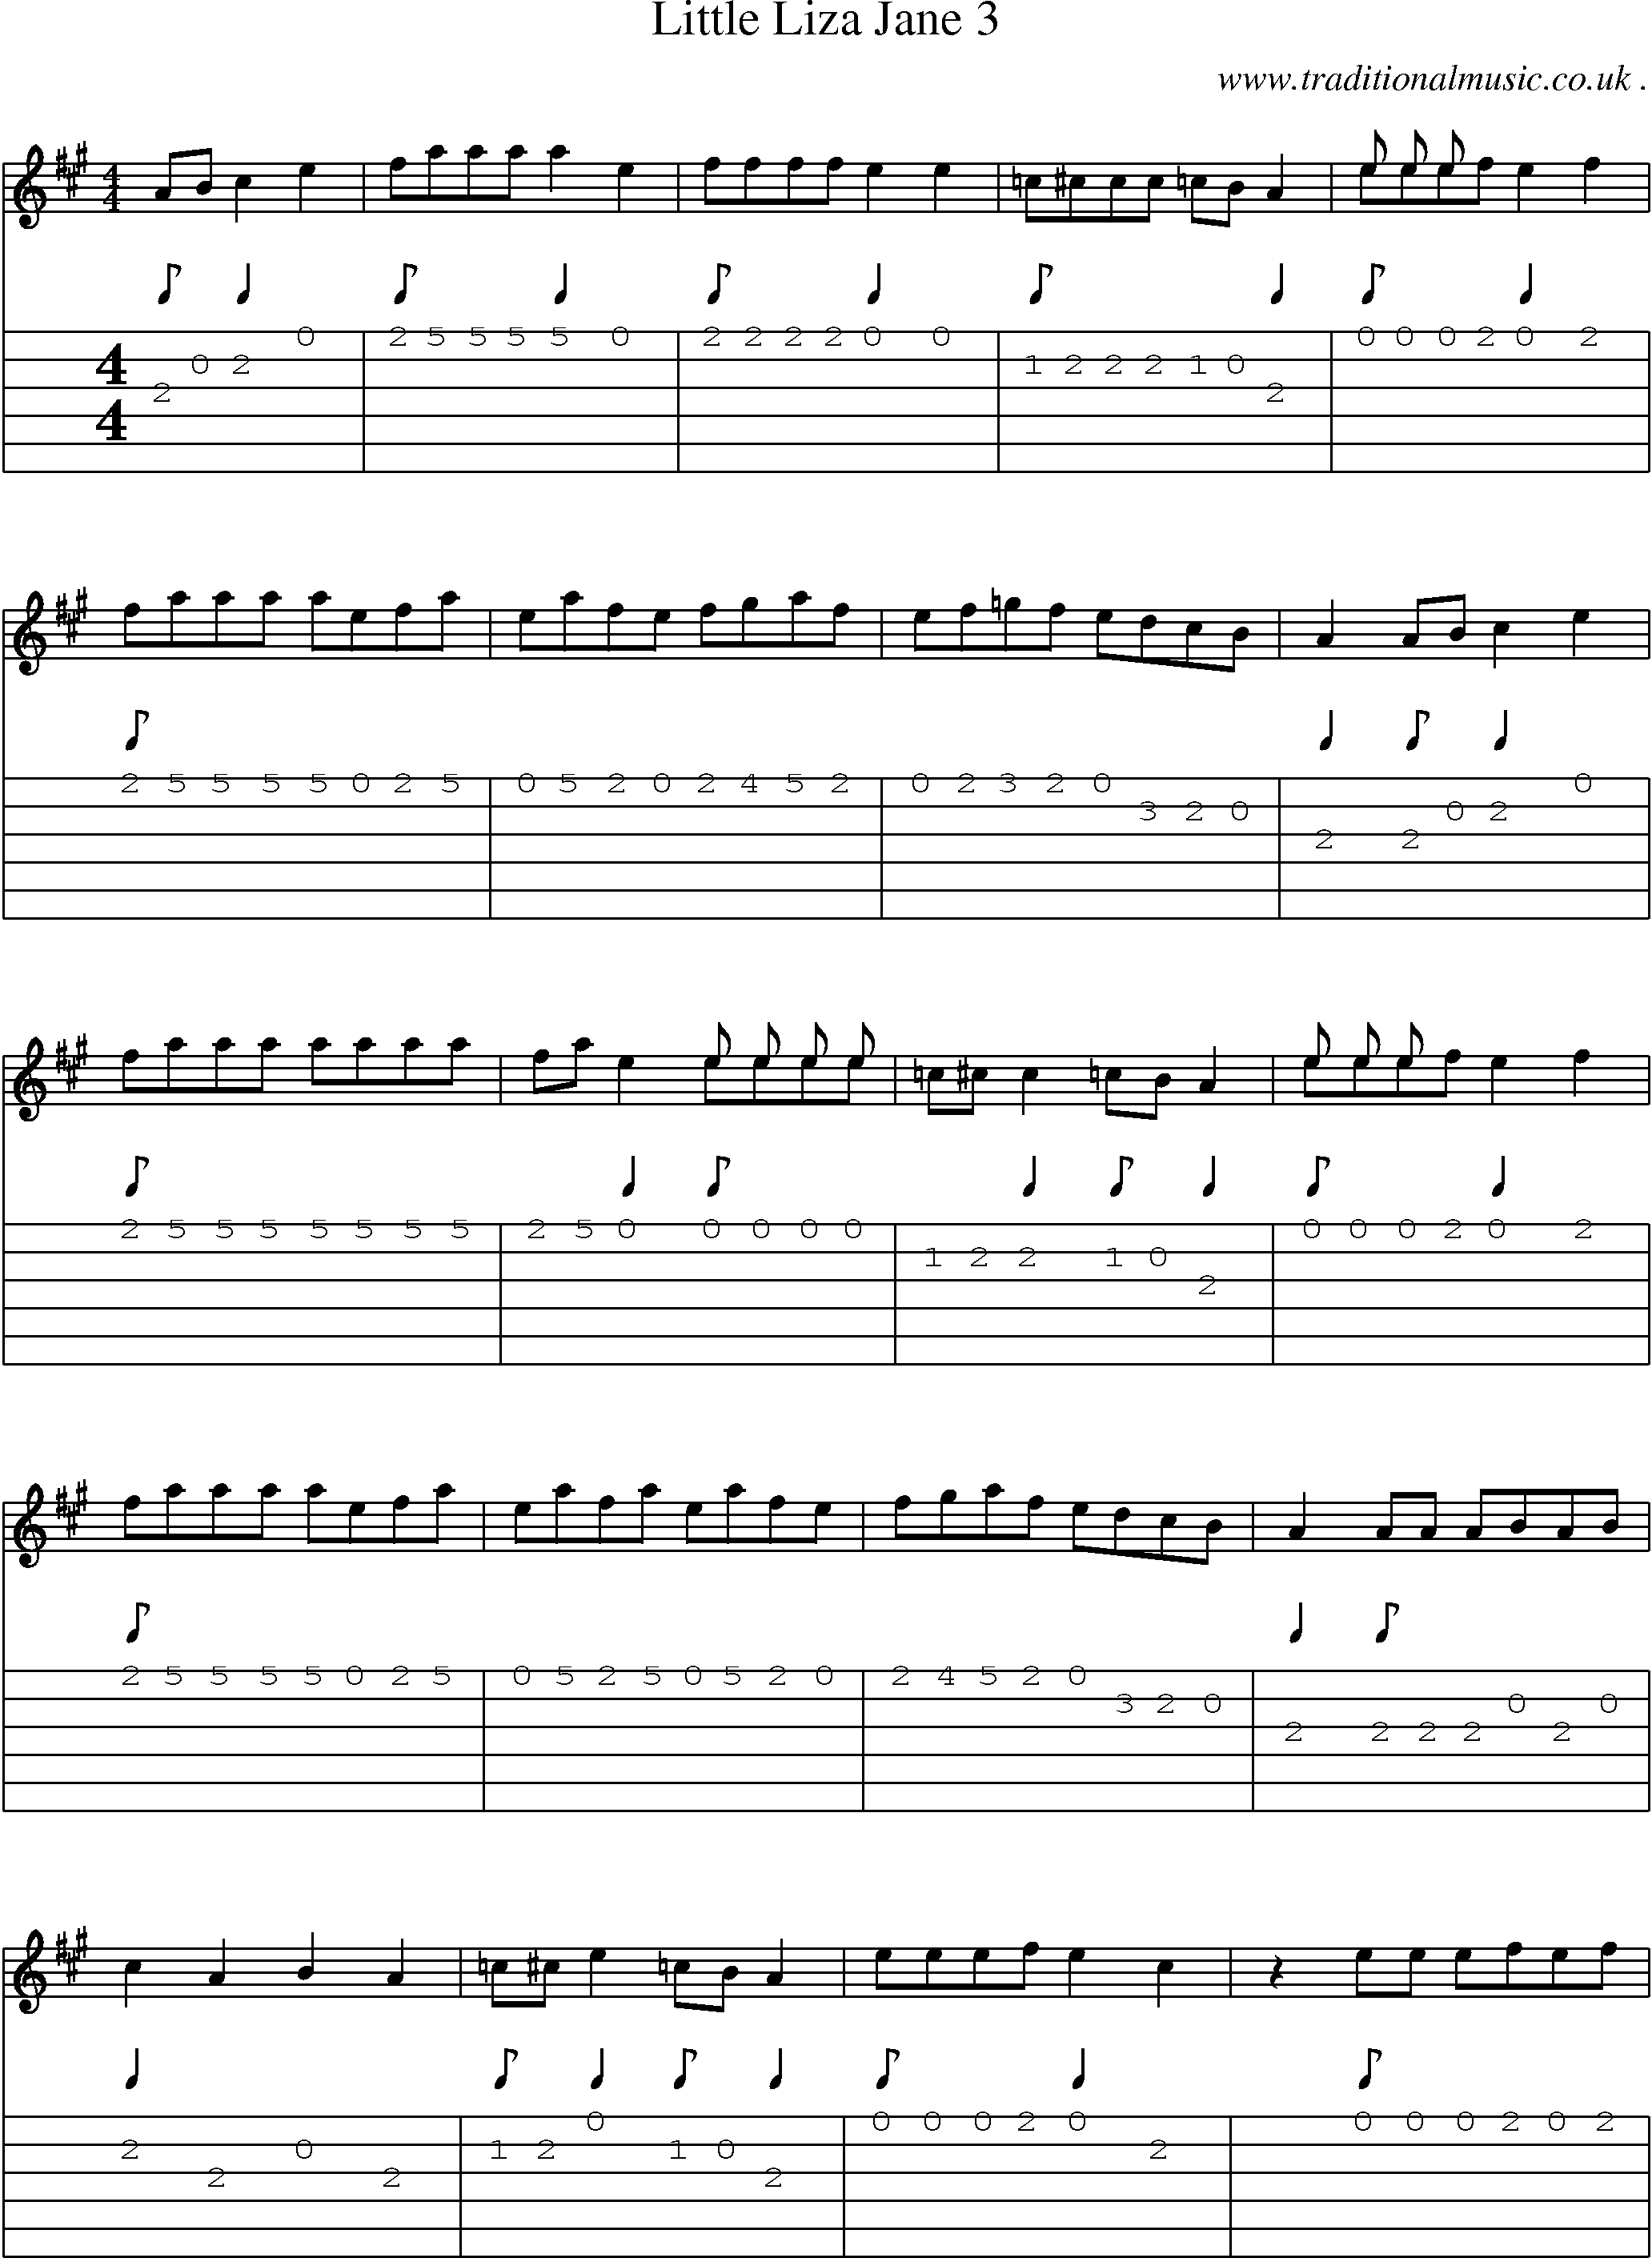 Music Score and Guitar Tabs for Little Liza Jane 3